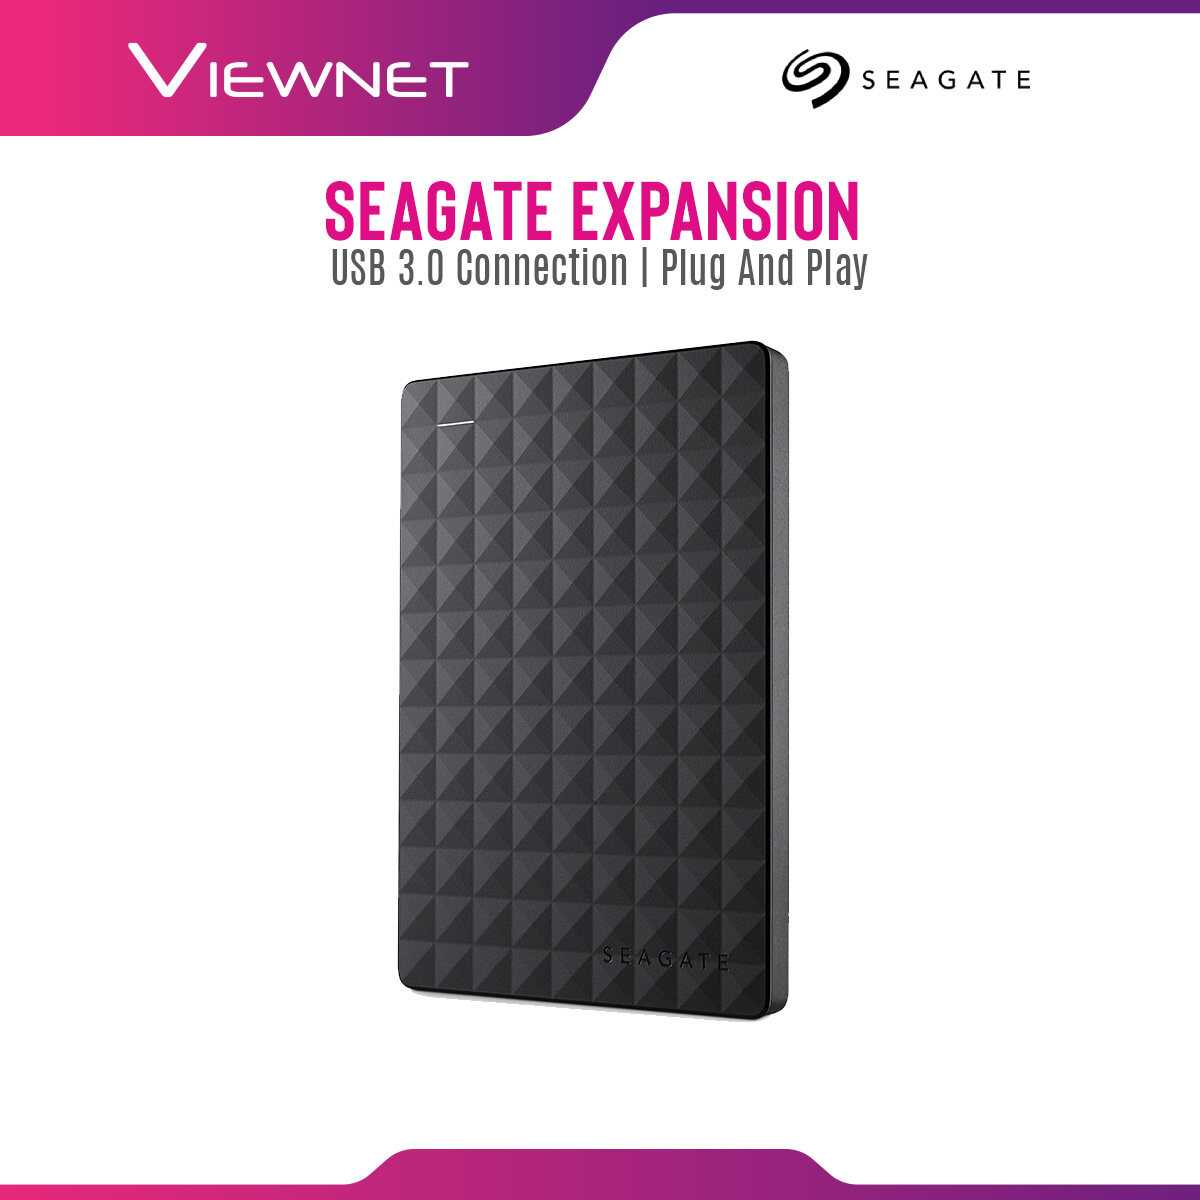 Seagate Expansion  4TB USB 3.0 Portable External Hard Drive with Drag-and-Drop File Saving Windows Compatibility External Hard Disk